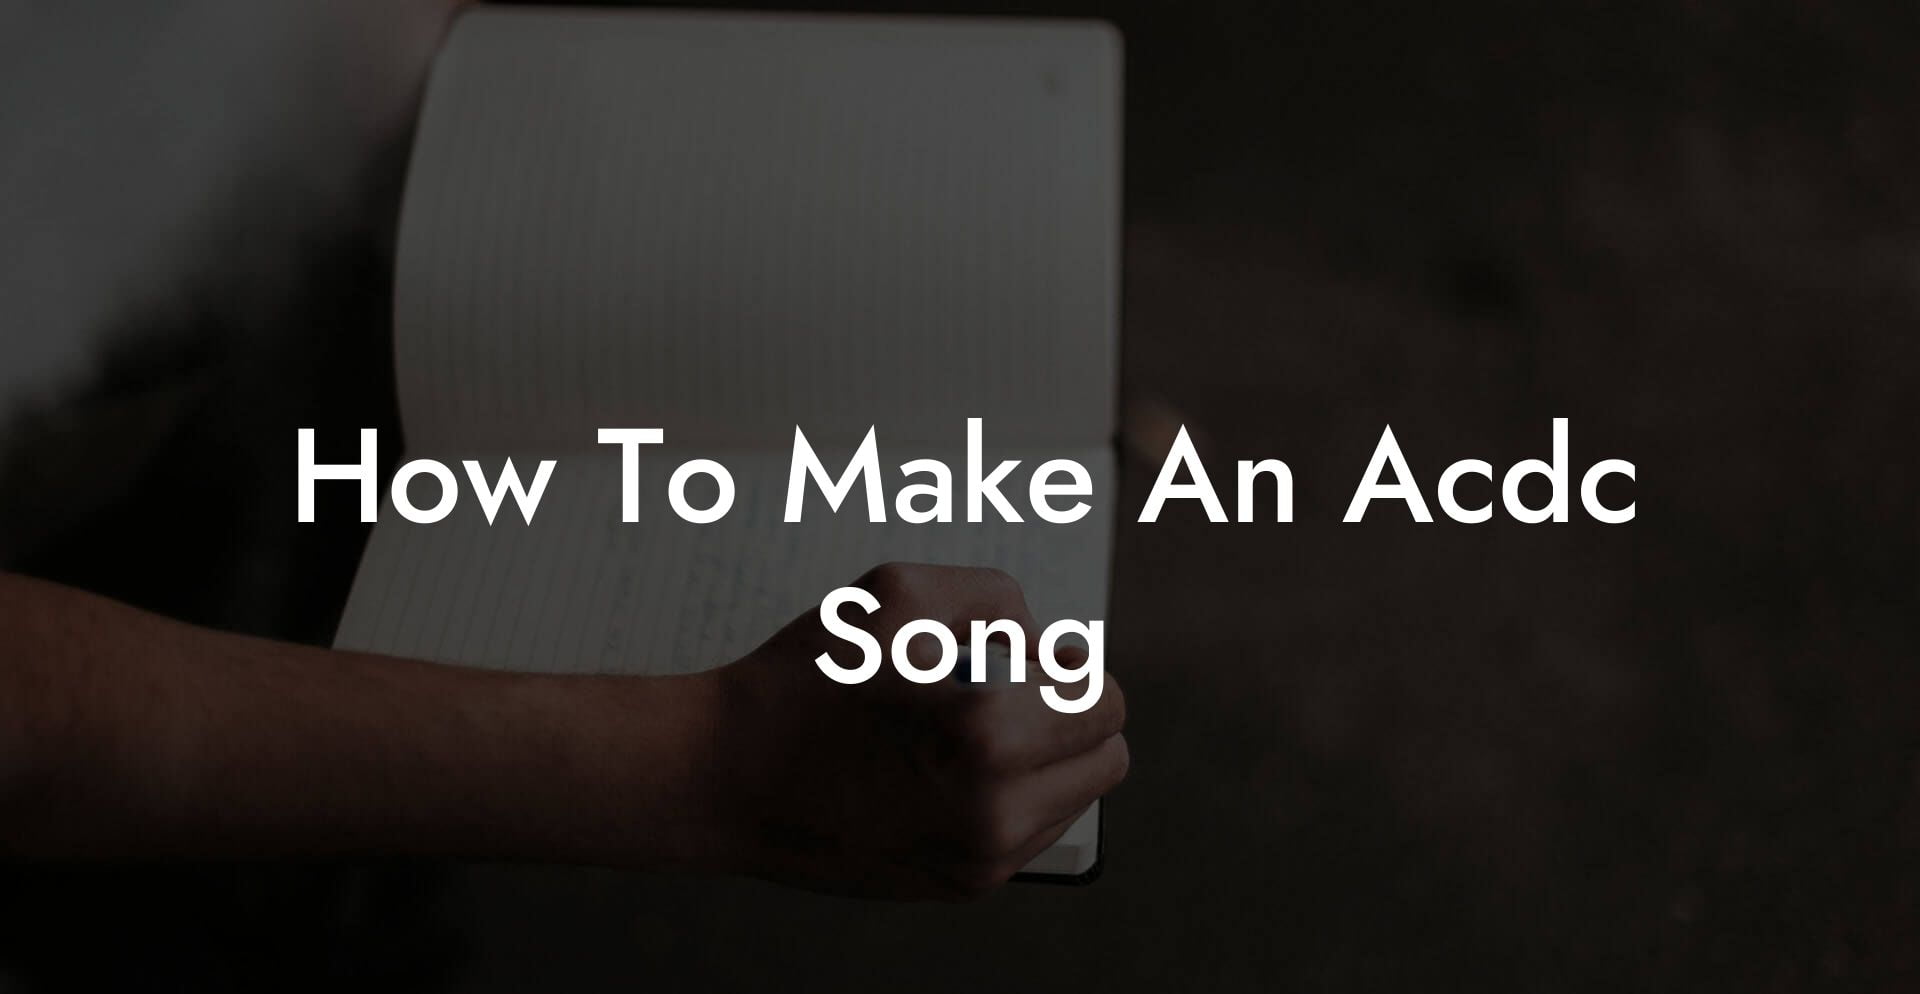 how to make an acdc song lyric assistant